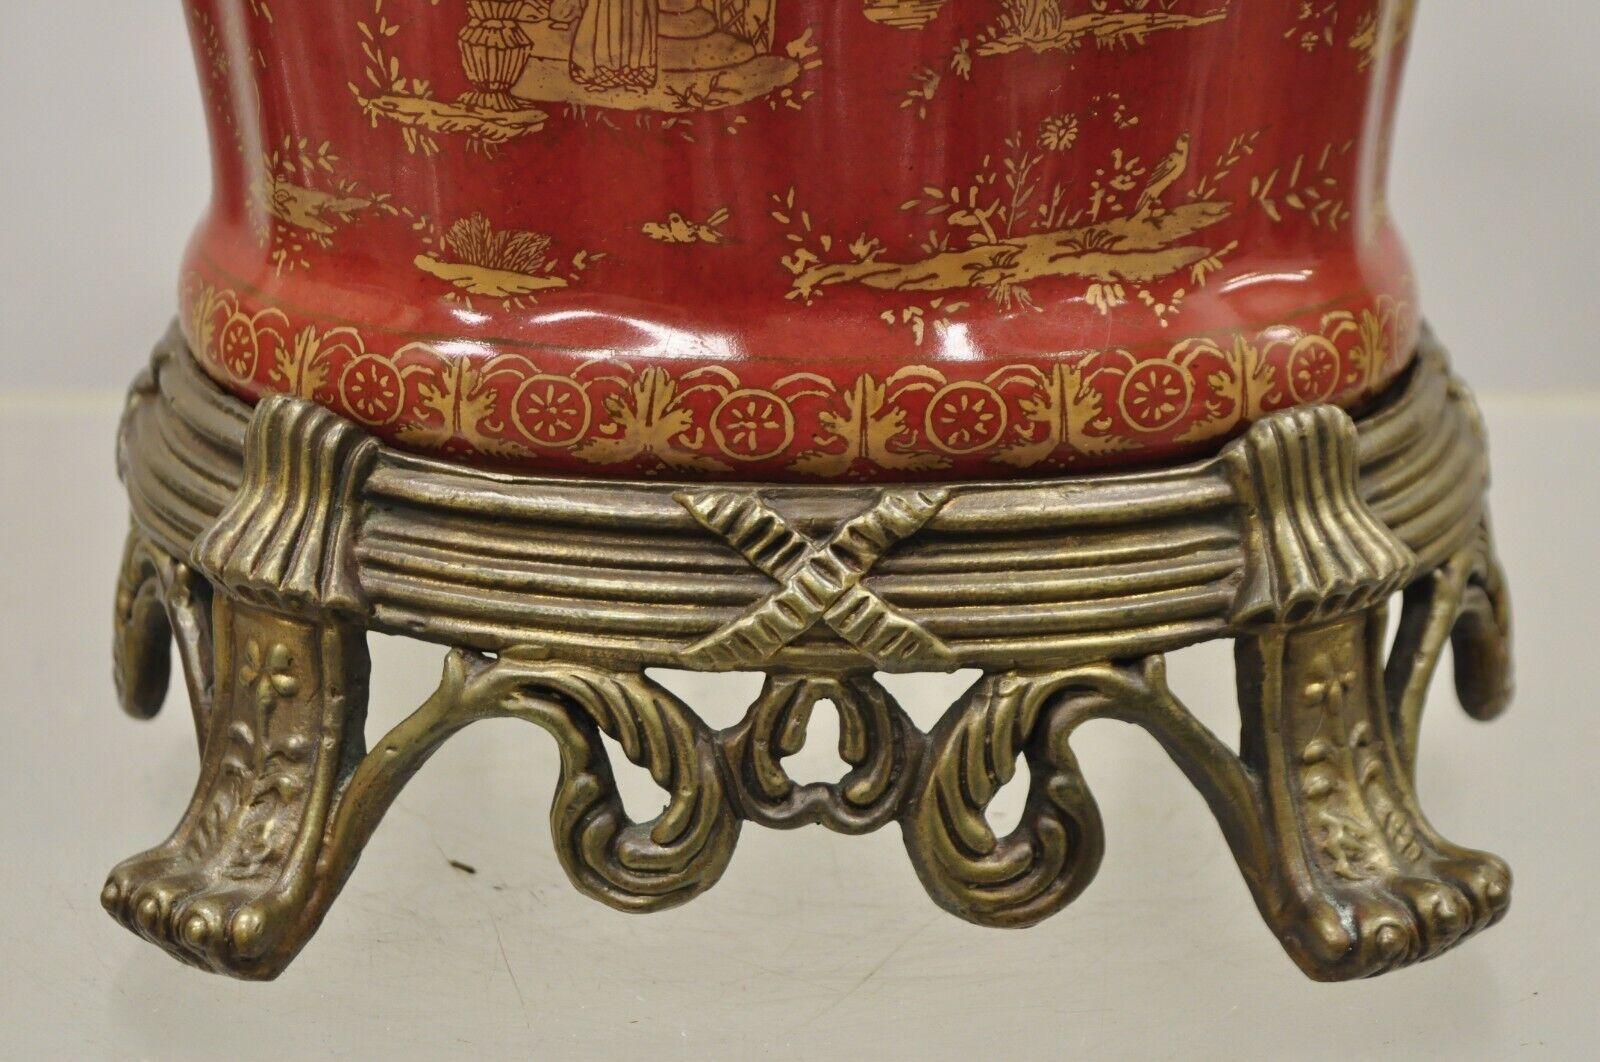 Chinoiserie Style Red Ceramic Scalloped Planter Pot on Ornate Bronze Base In Good Condition For Sale In Philadelphia, PA